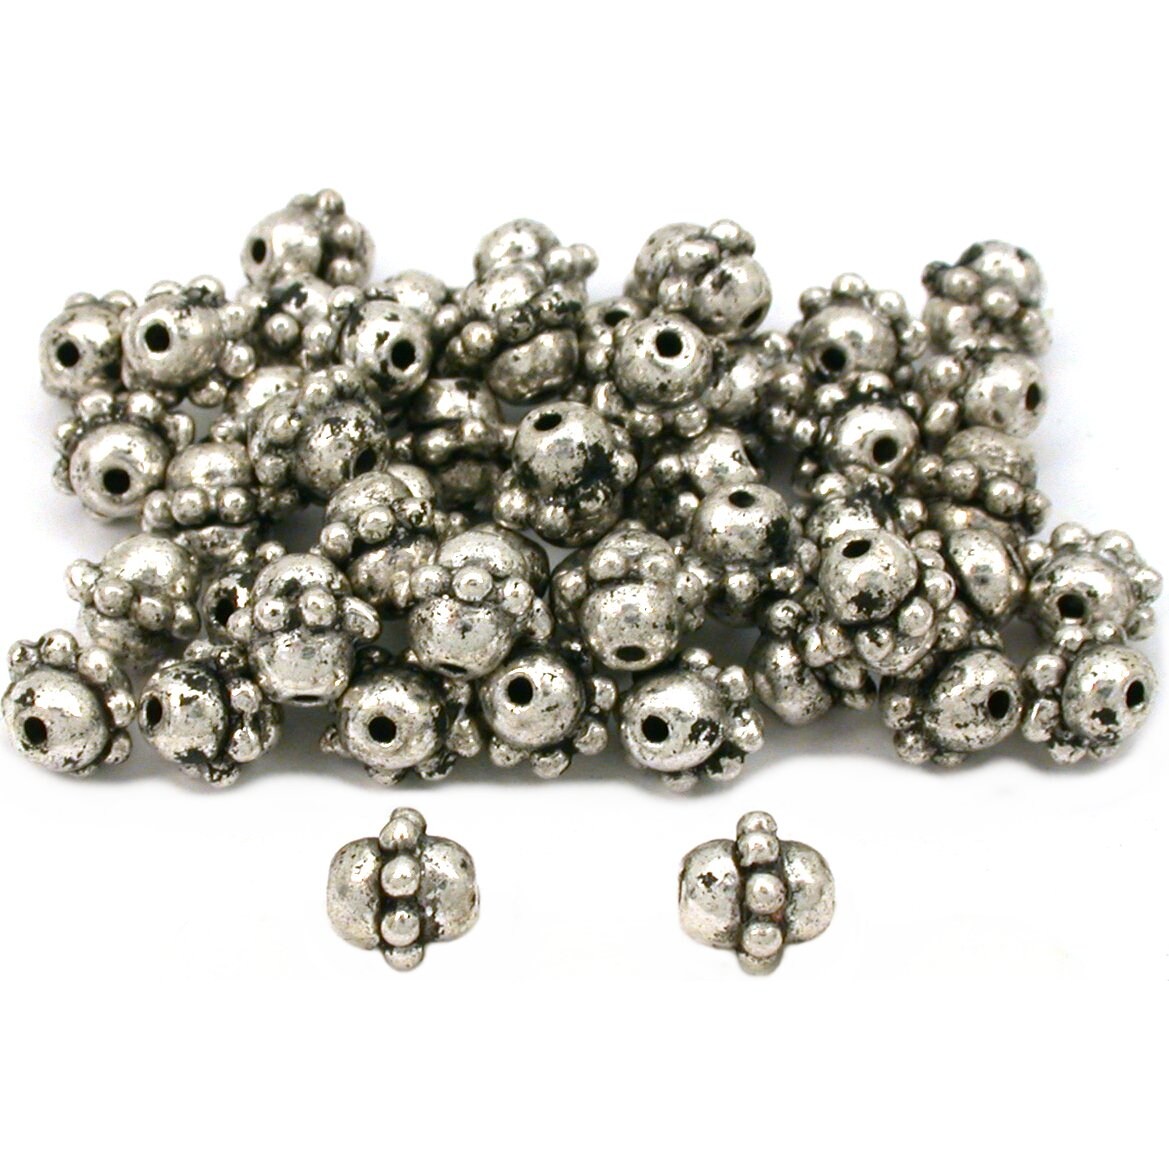 Barrel Bali Beads Antique Silver Plated 7mm Approx 50